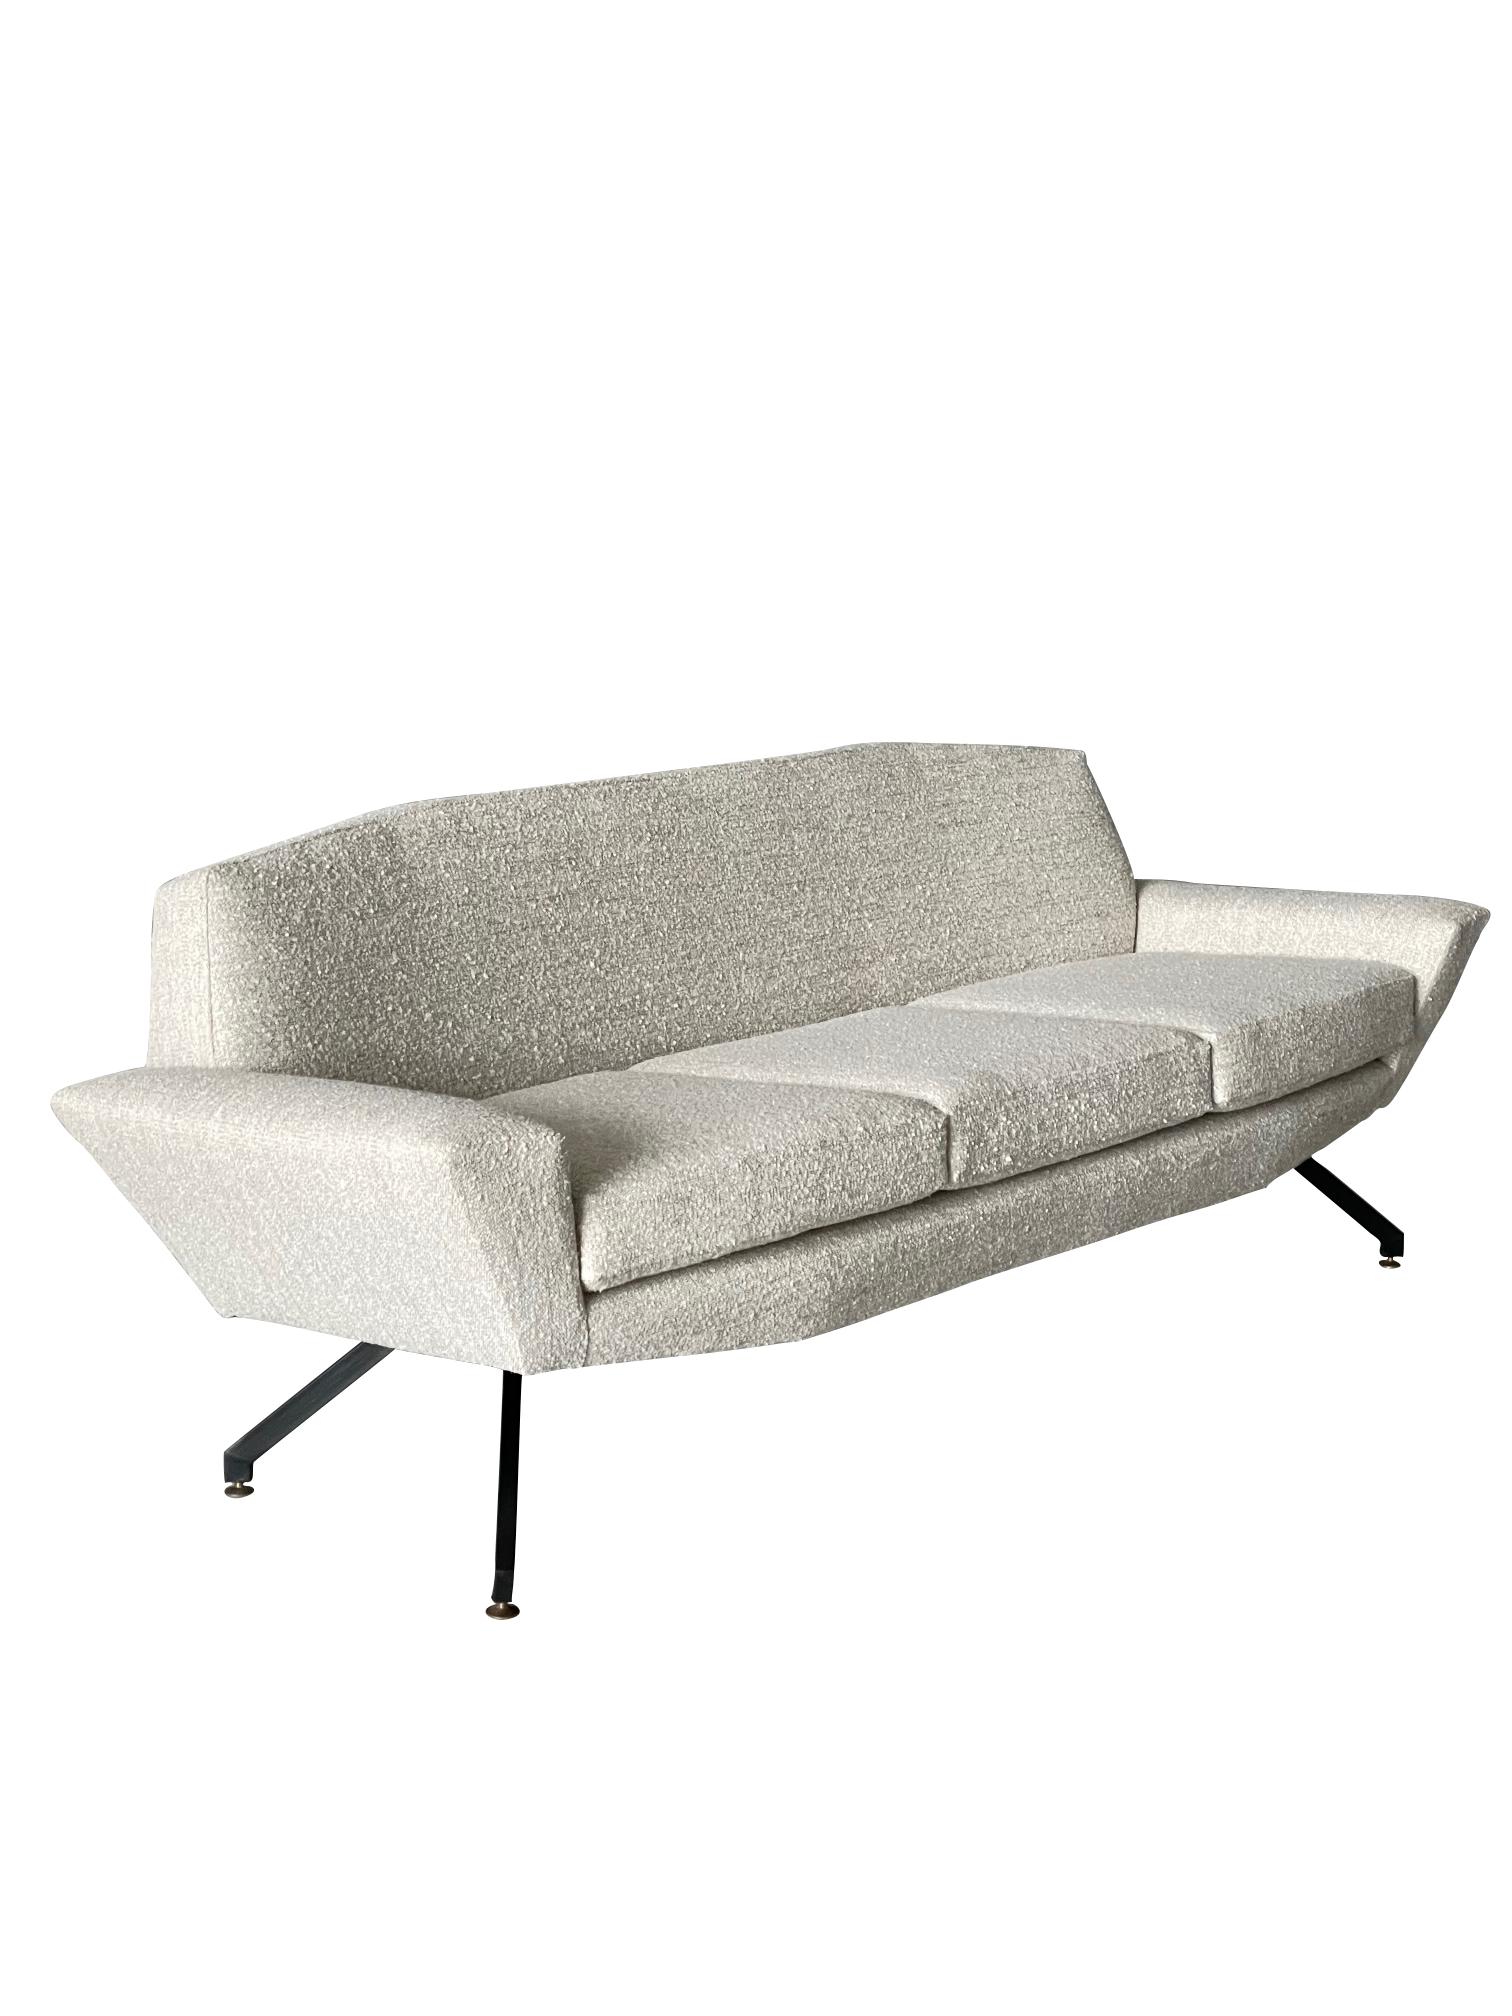 1950's Italian Lenzi sofa.
An angular sofa displaying great shape
from all angles.
This iconic sofa has been re - upholstered in quality
wool/linen fabric.
Signature metal legs.
Very comfortable and stylish.
Also available pair of matching